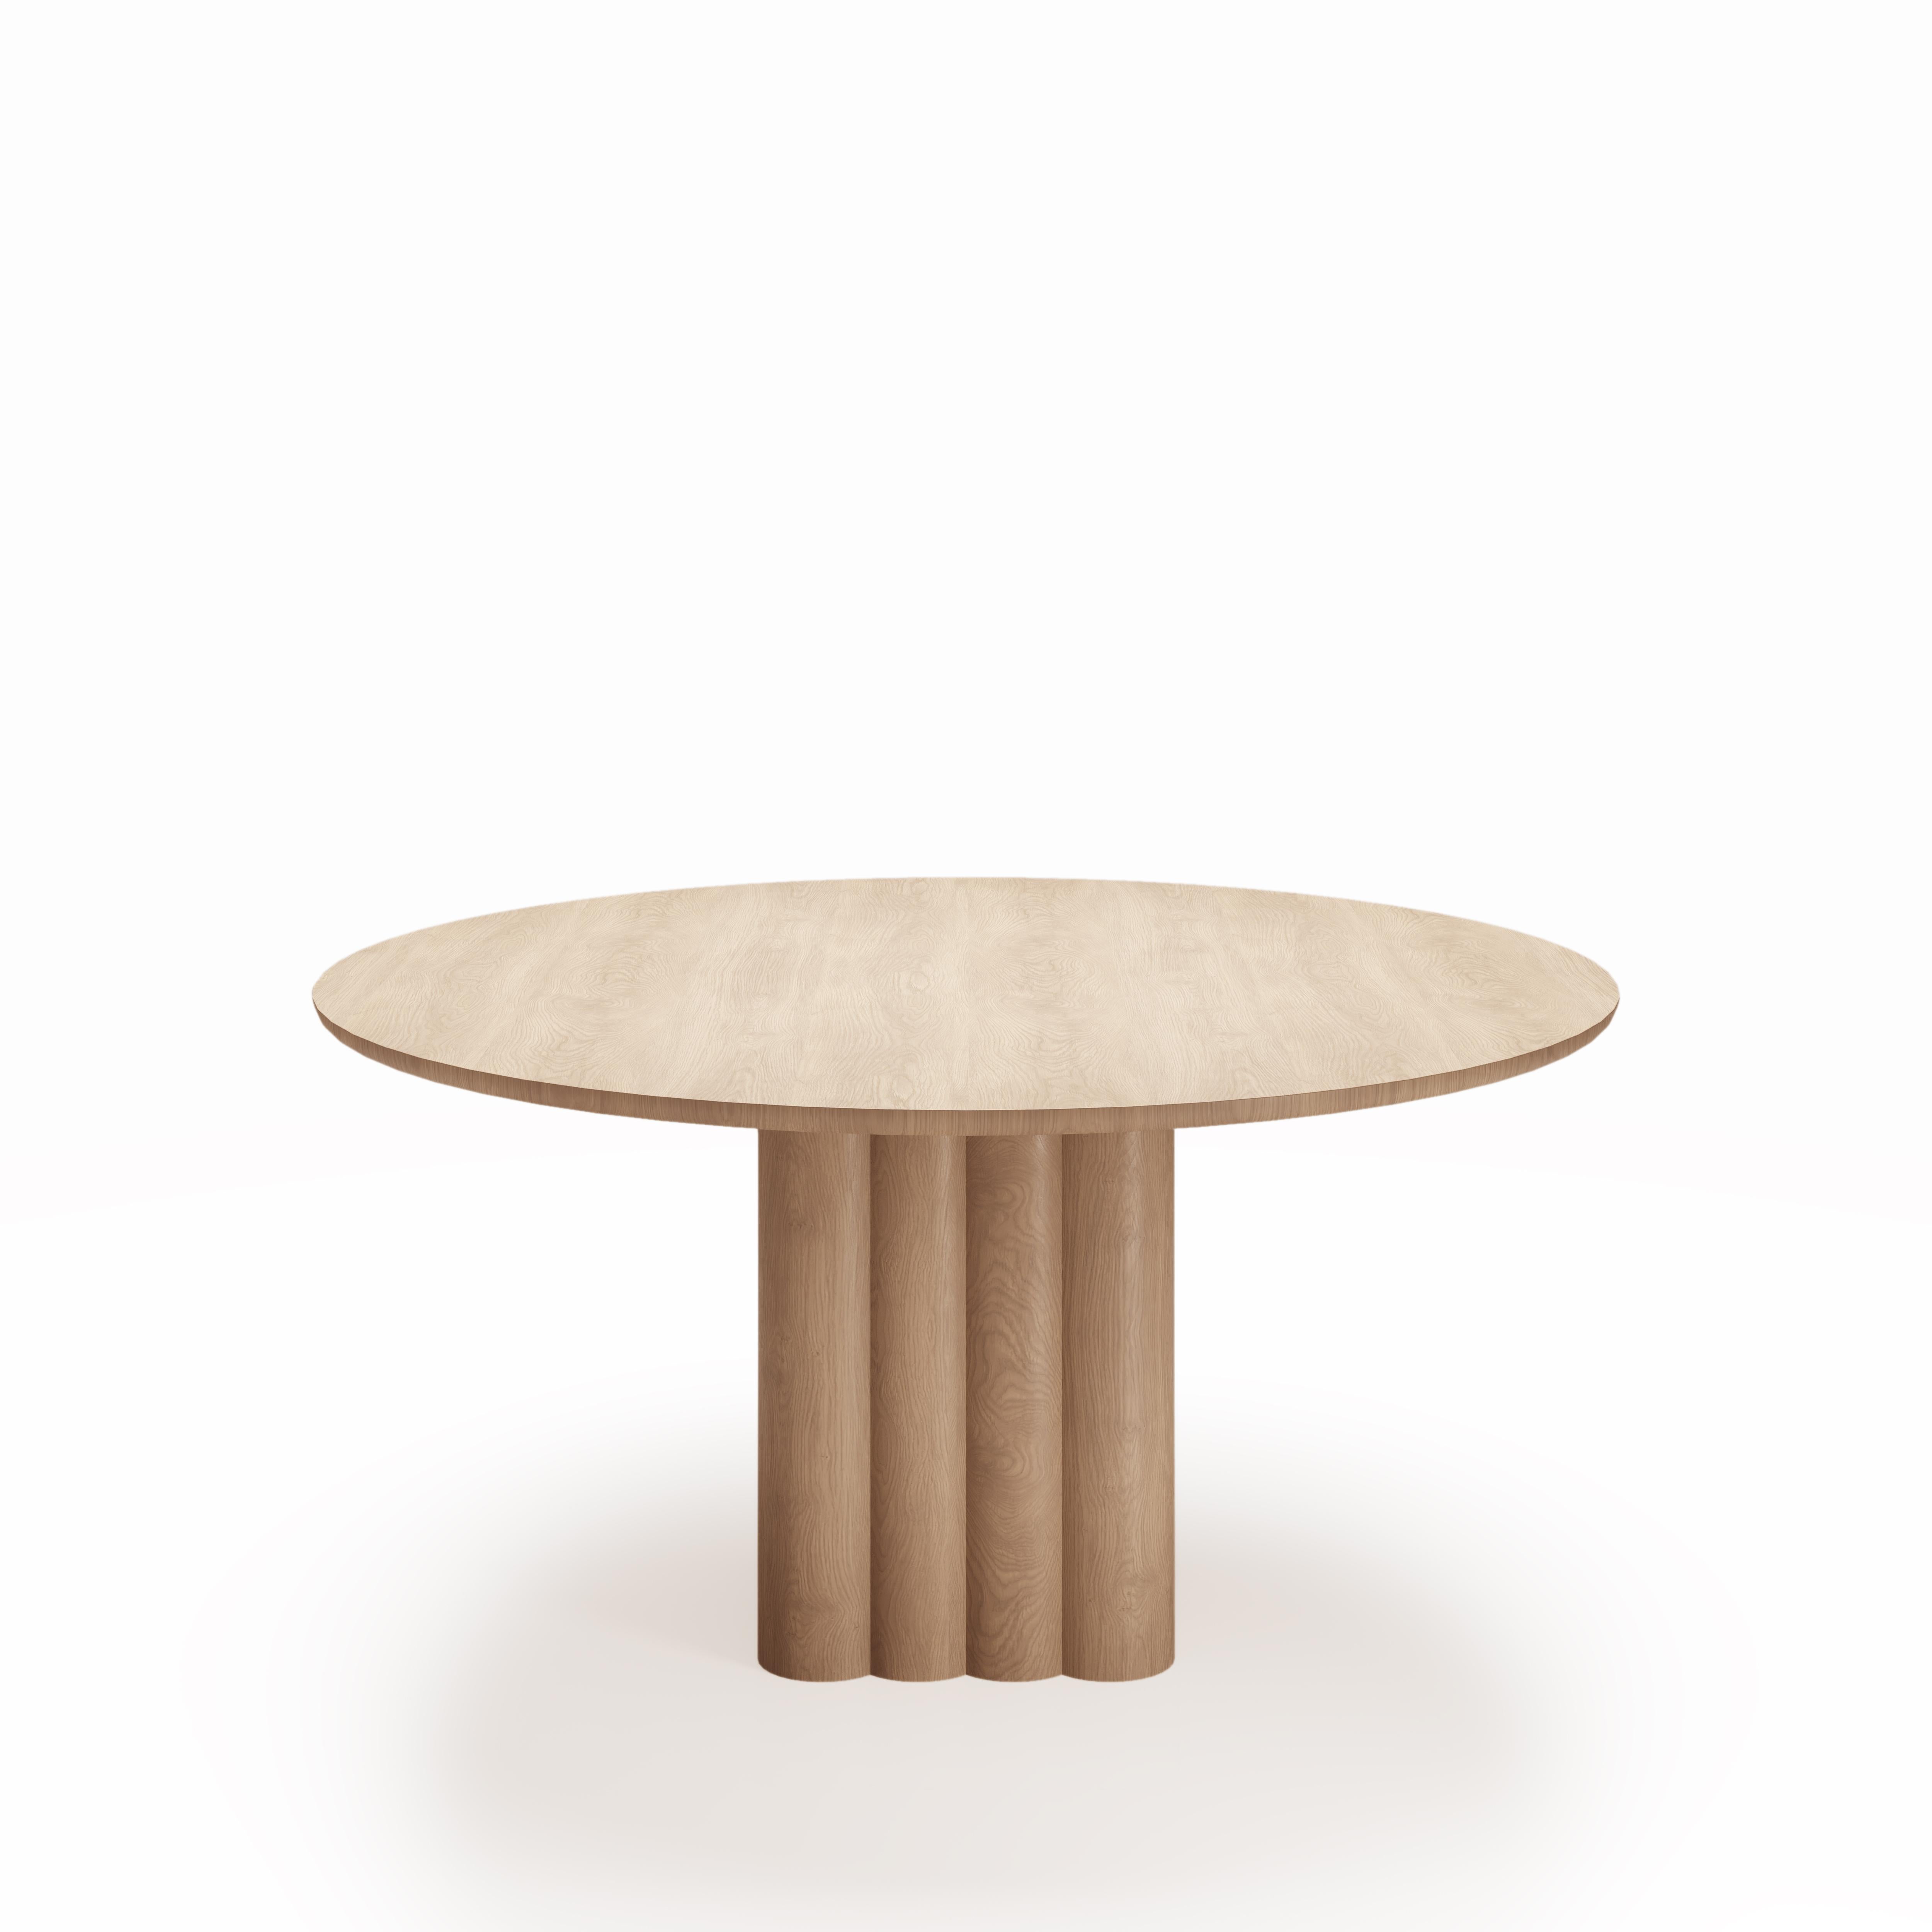 Round Dining Table 'Plush' by Dk3, Smoked Oak or Walnut, 140 cm For Sale 3